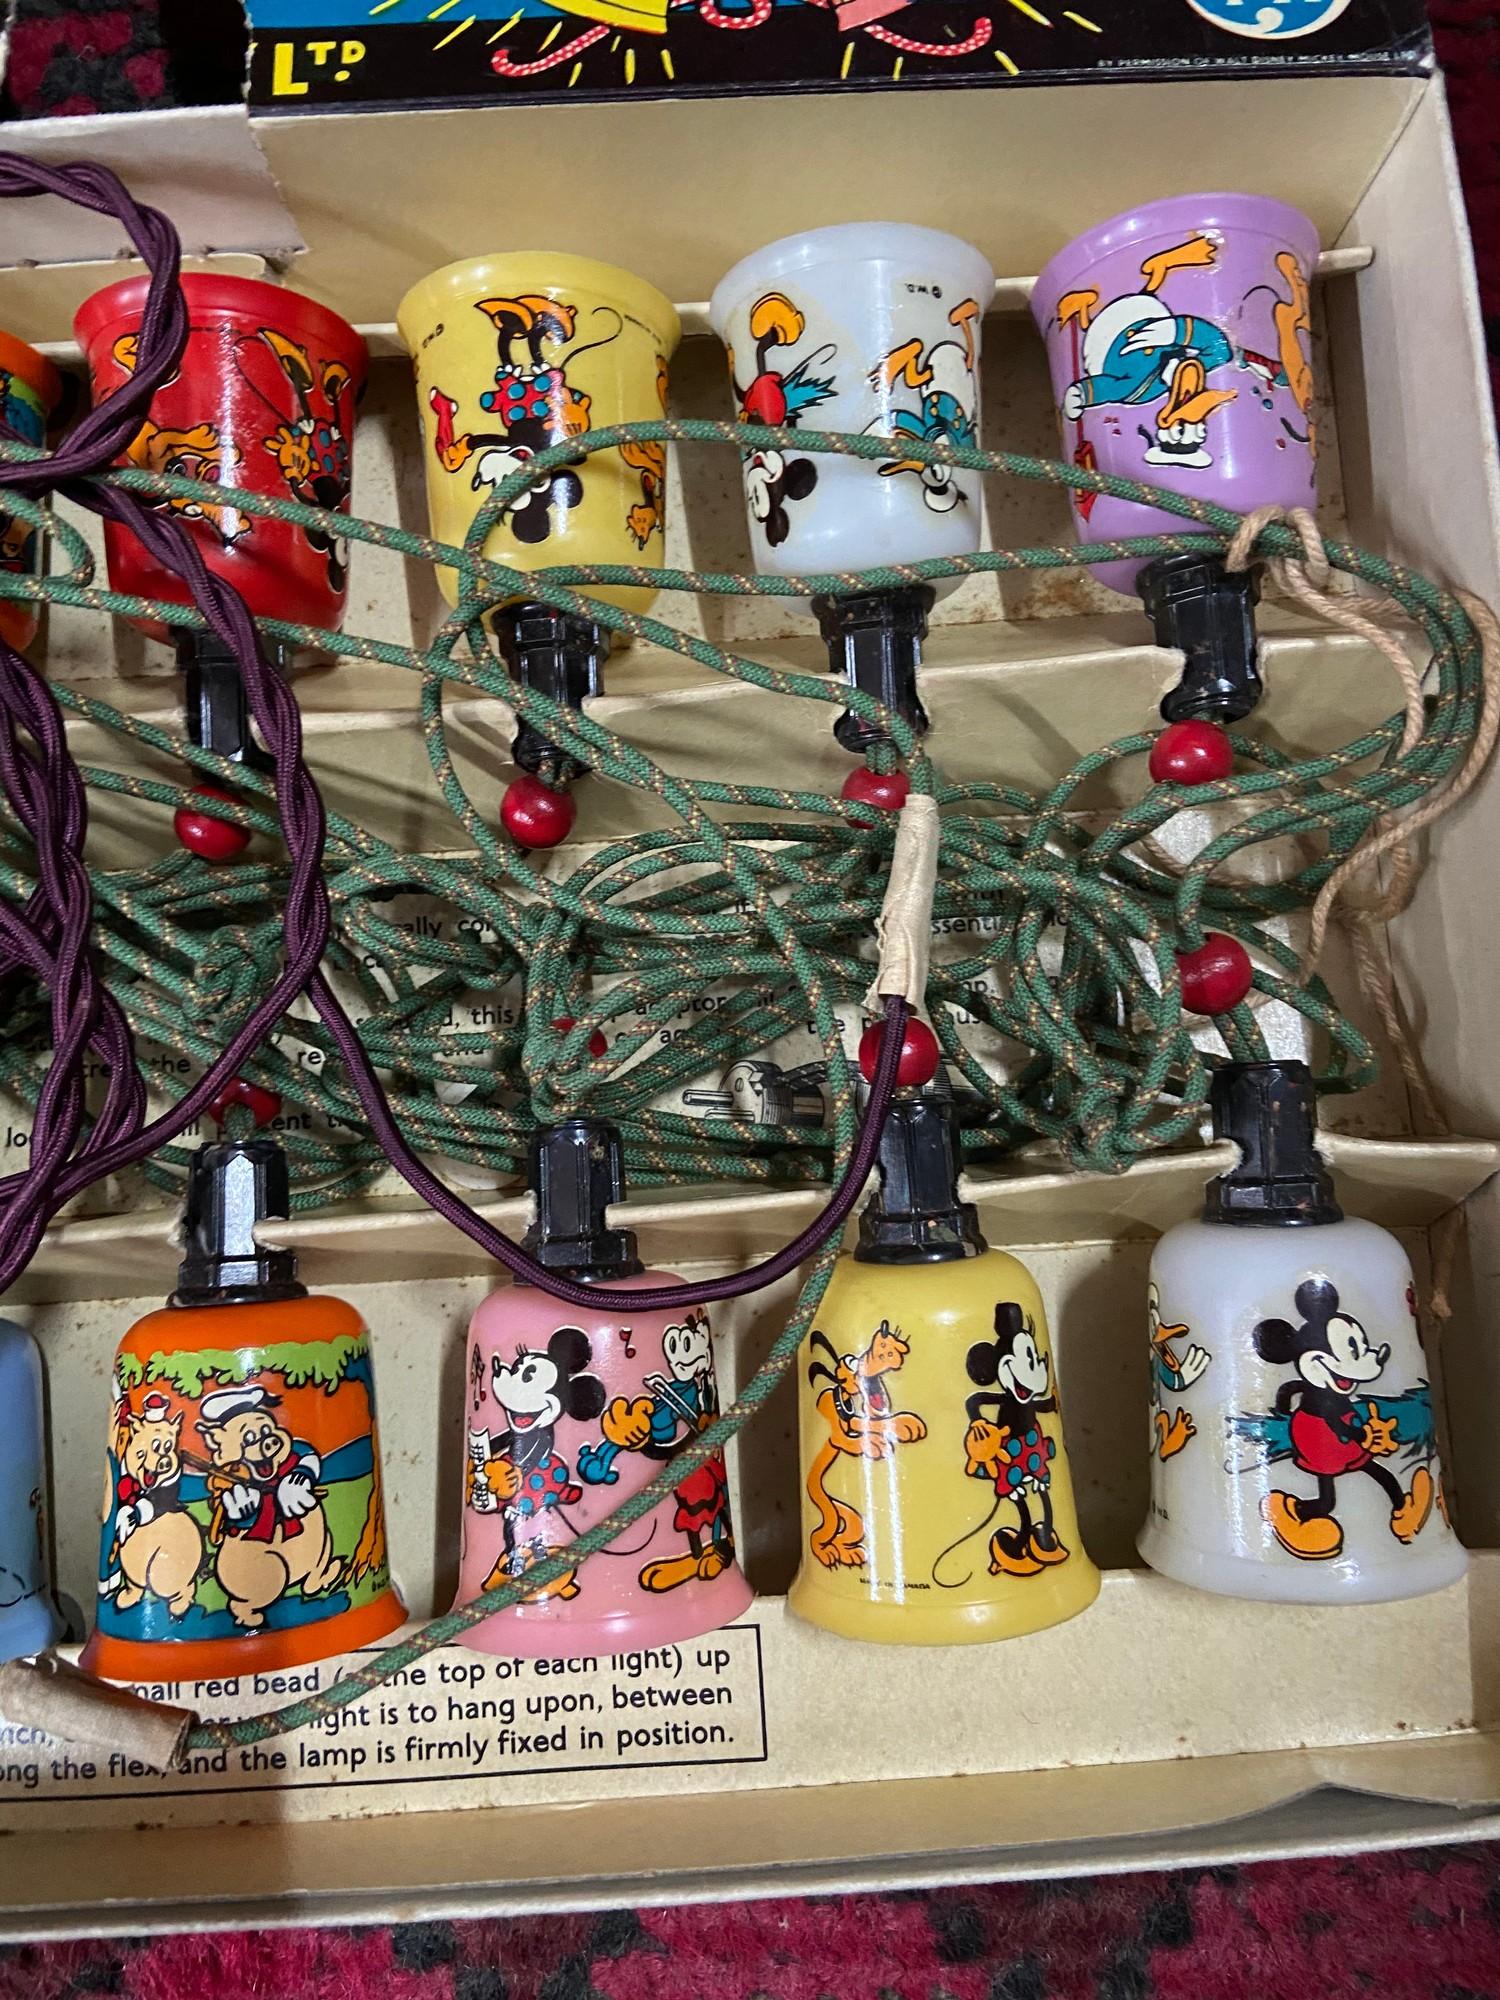 A Set of vintage Mazda Mickey Mouse Lights by The British Thomson- Houston Co. Ltd.